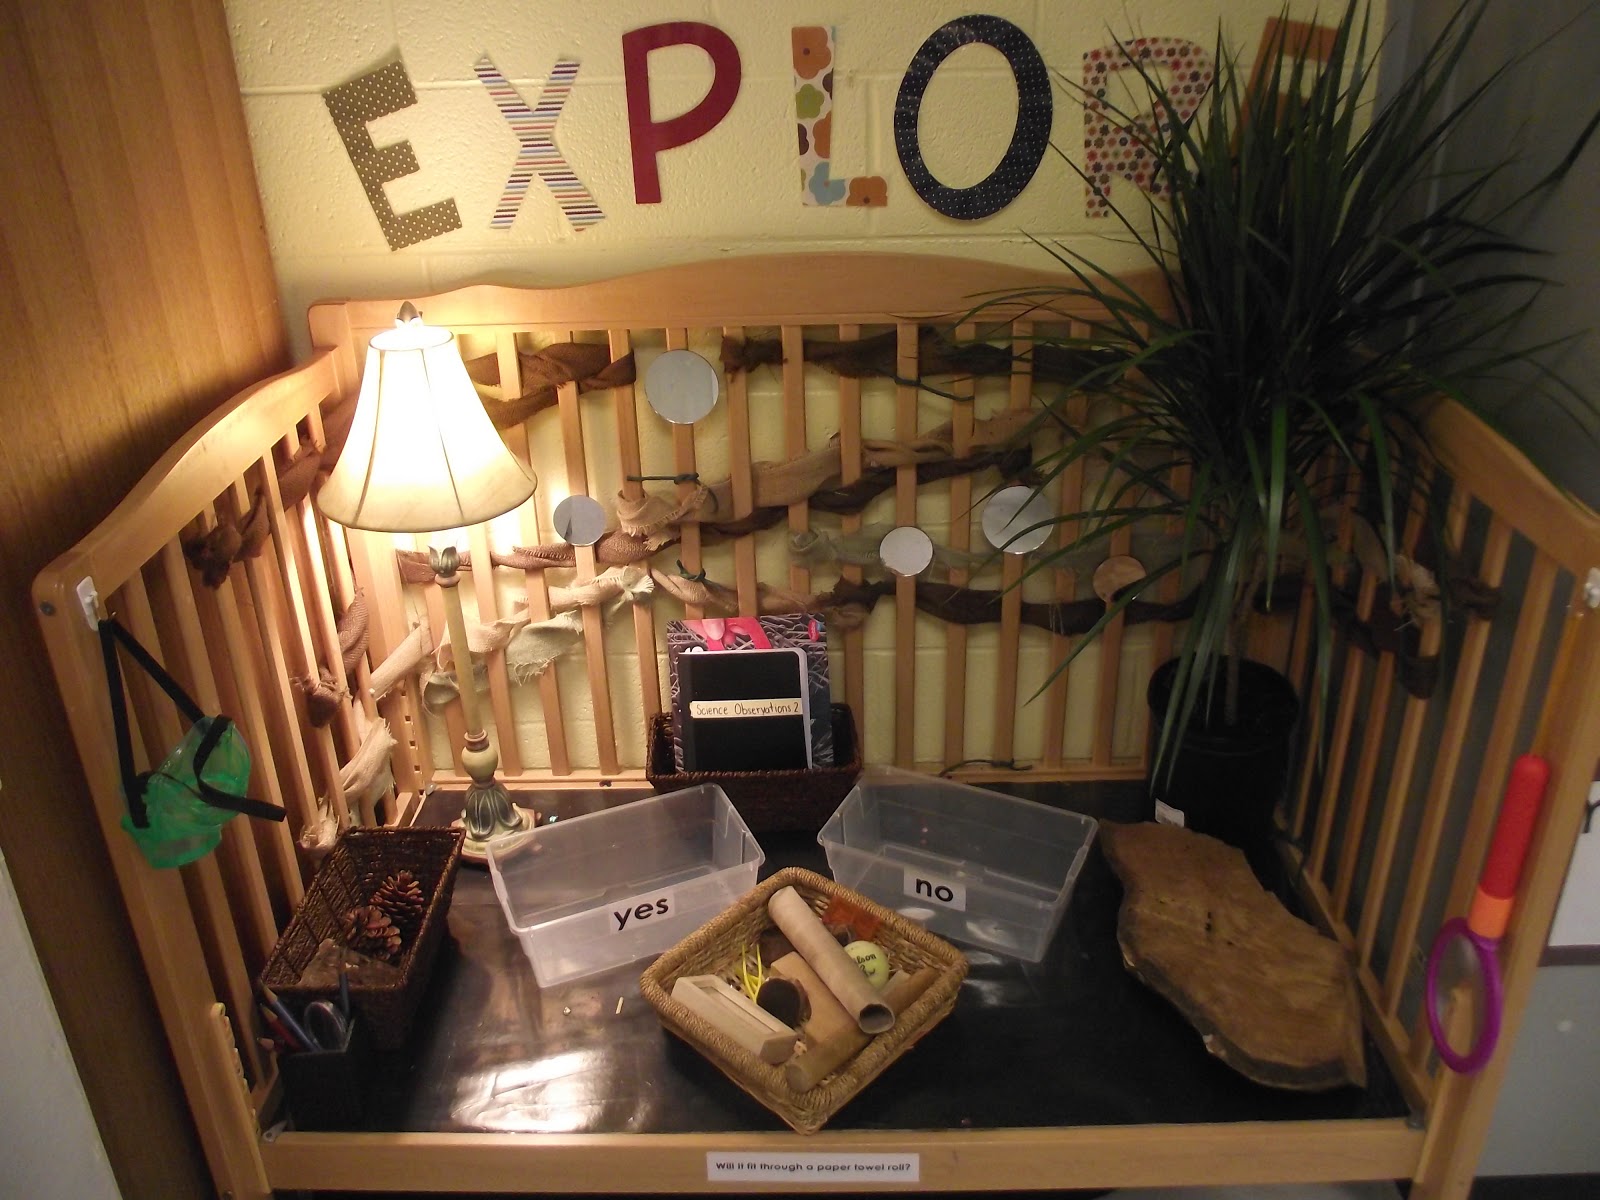 Better Classrooms and Playgrounds: DIY Science Center from a Baby Crib